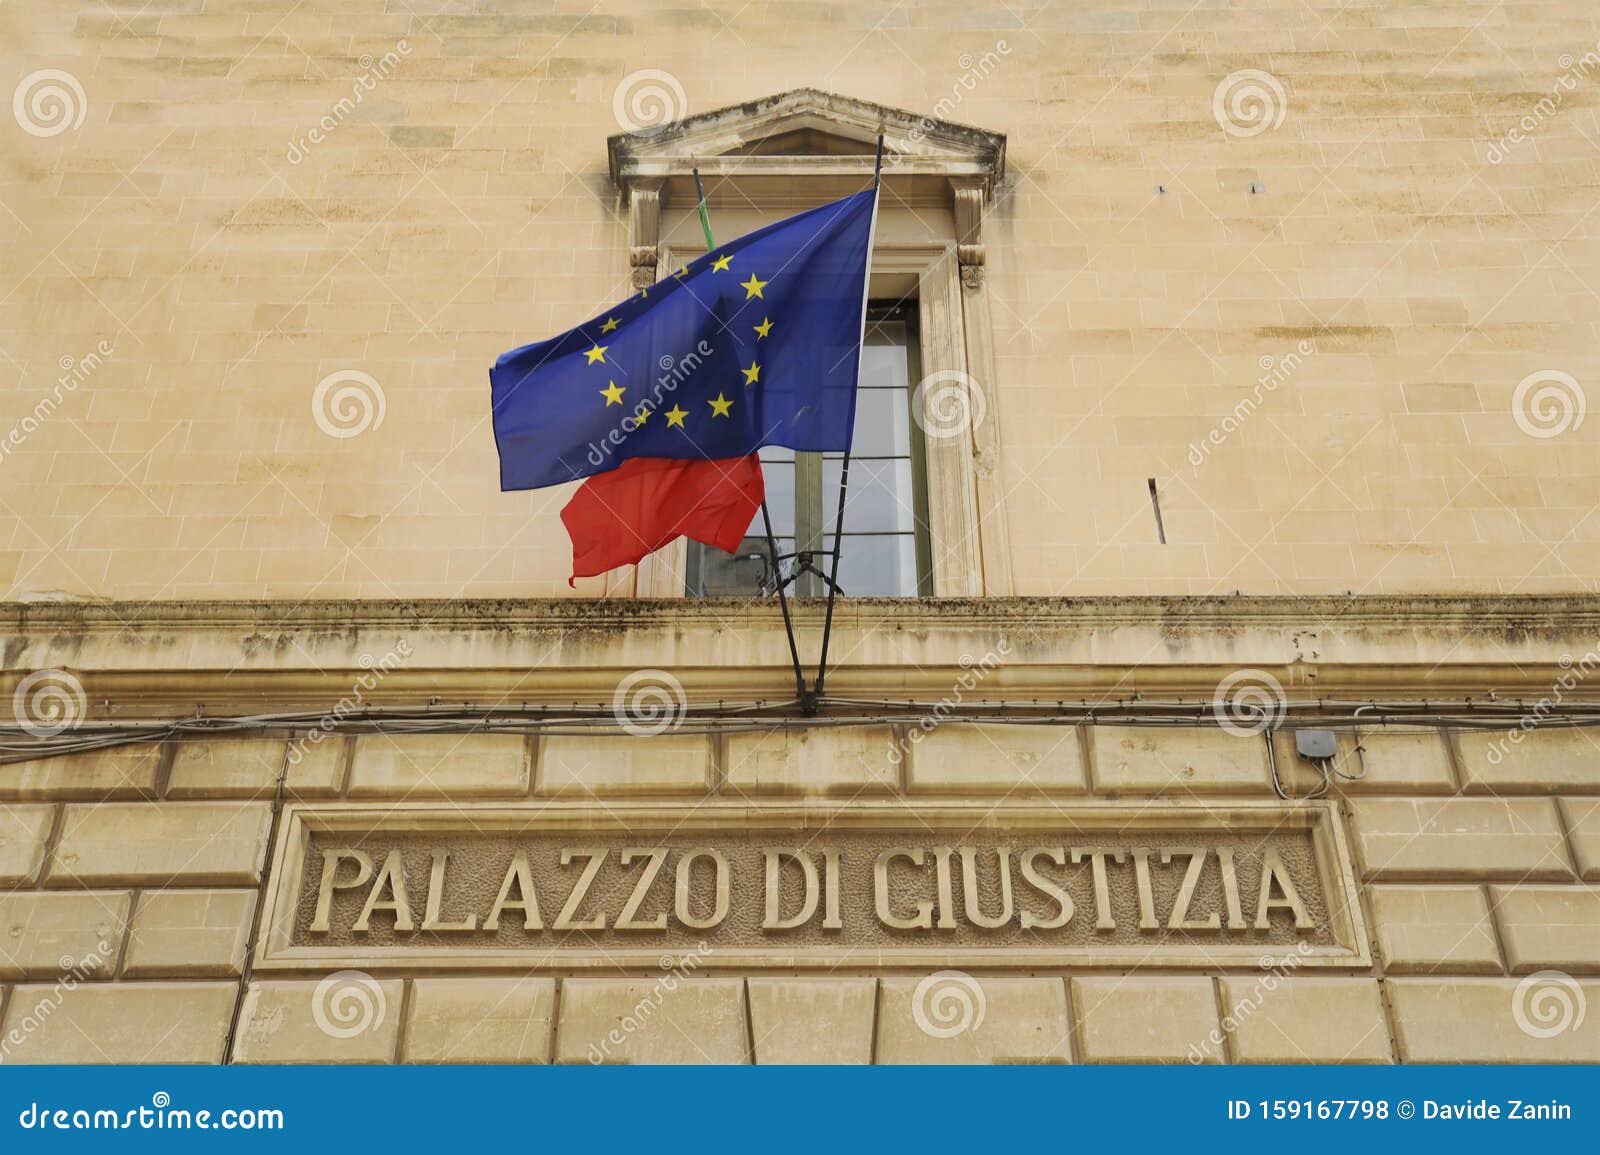 palazzo di giustizia. palace of justice in lecce, italy. former convent of the jesuits. european and italian flag on facade